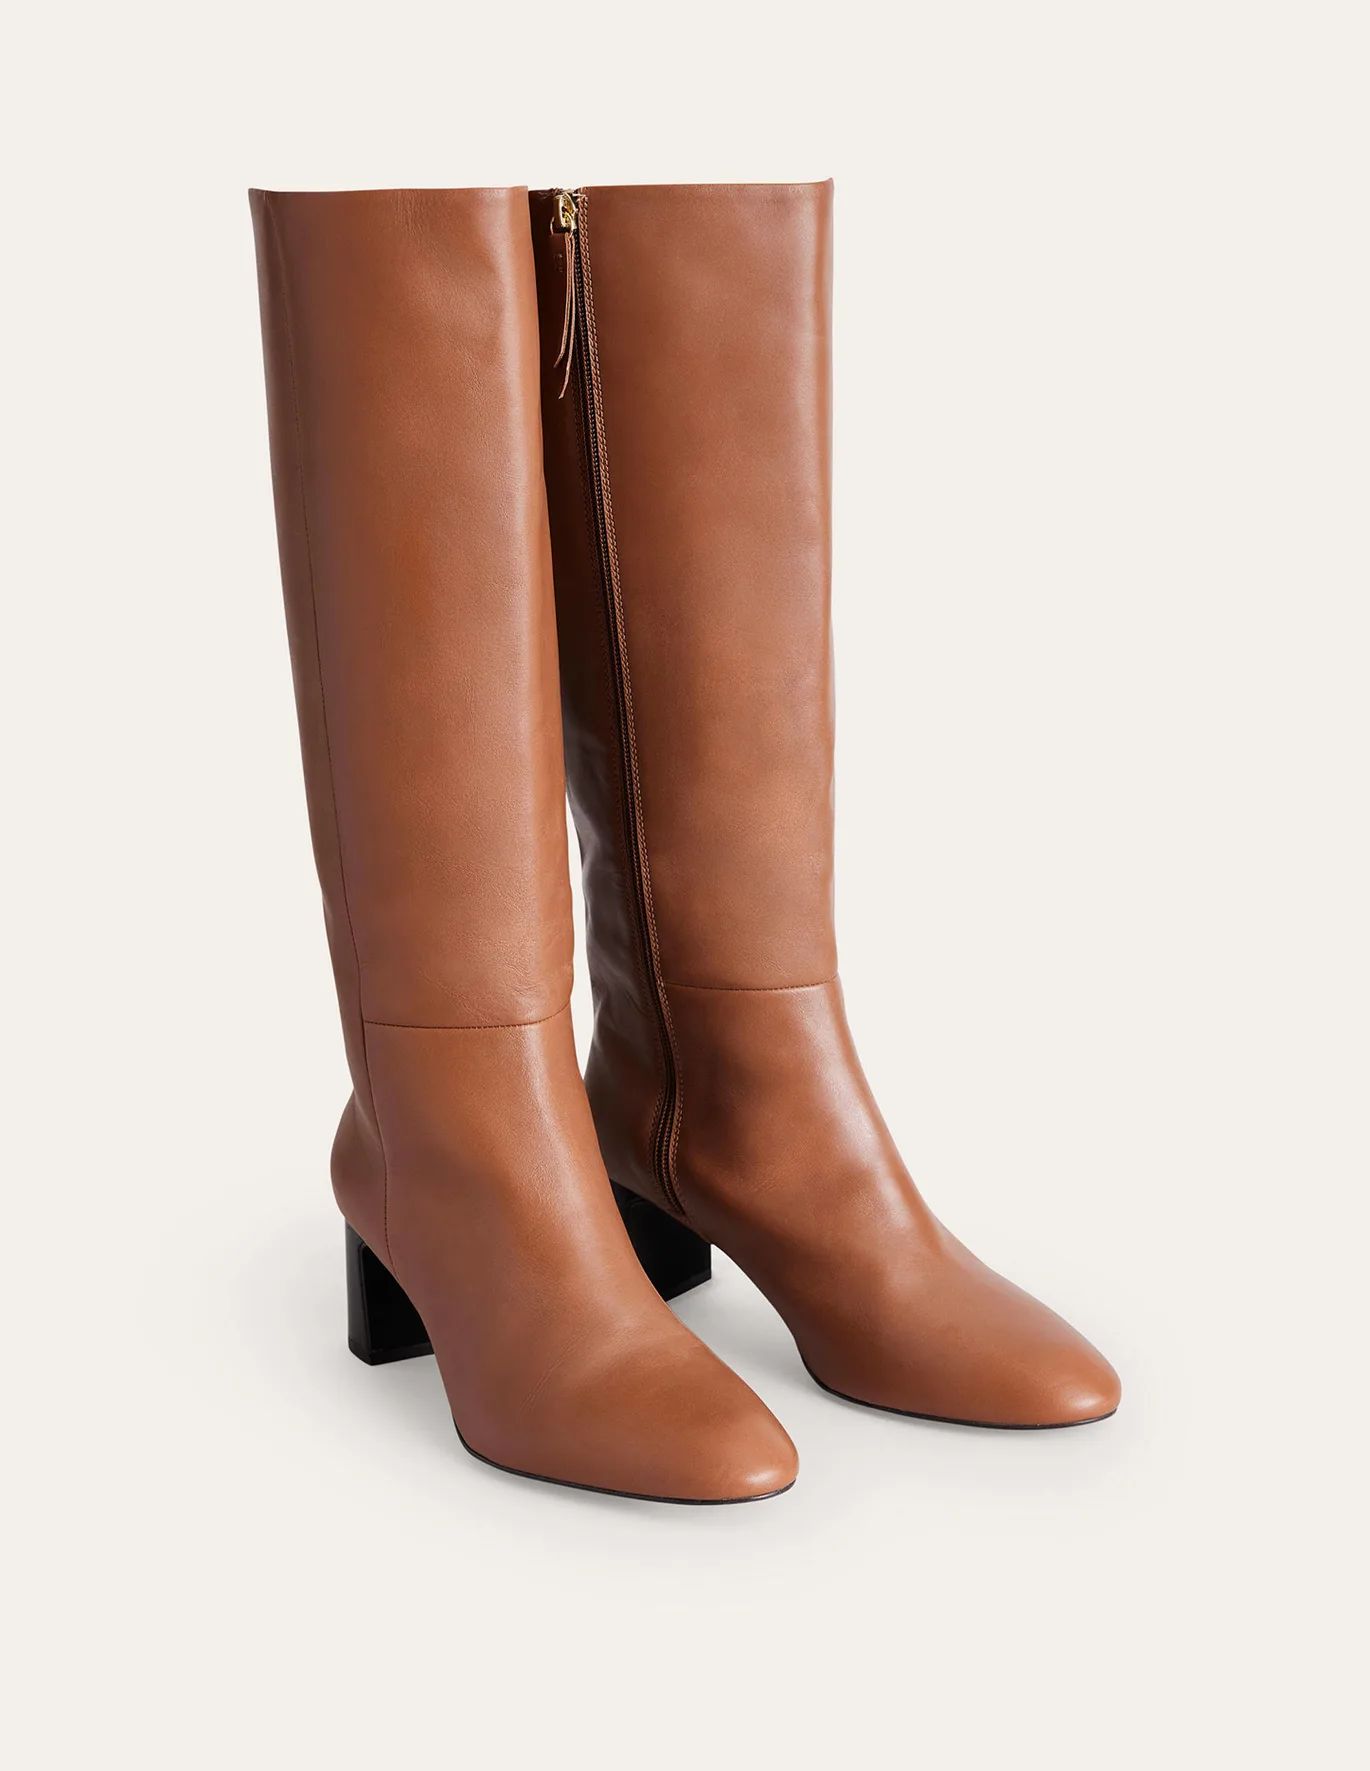 Erica Knee High Leather Boots | Boden (US)